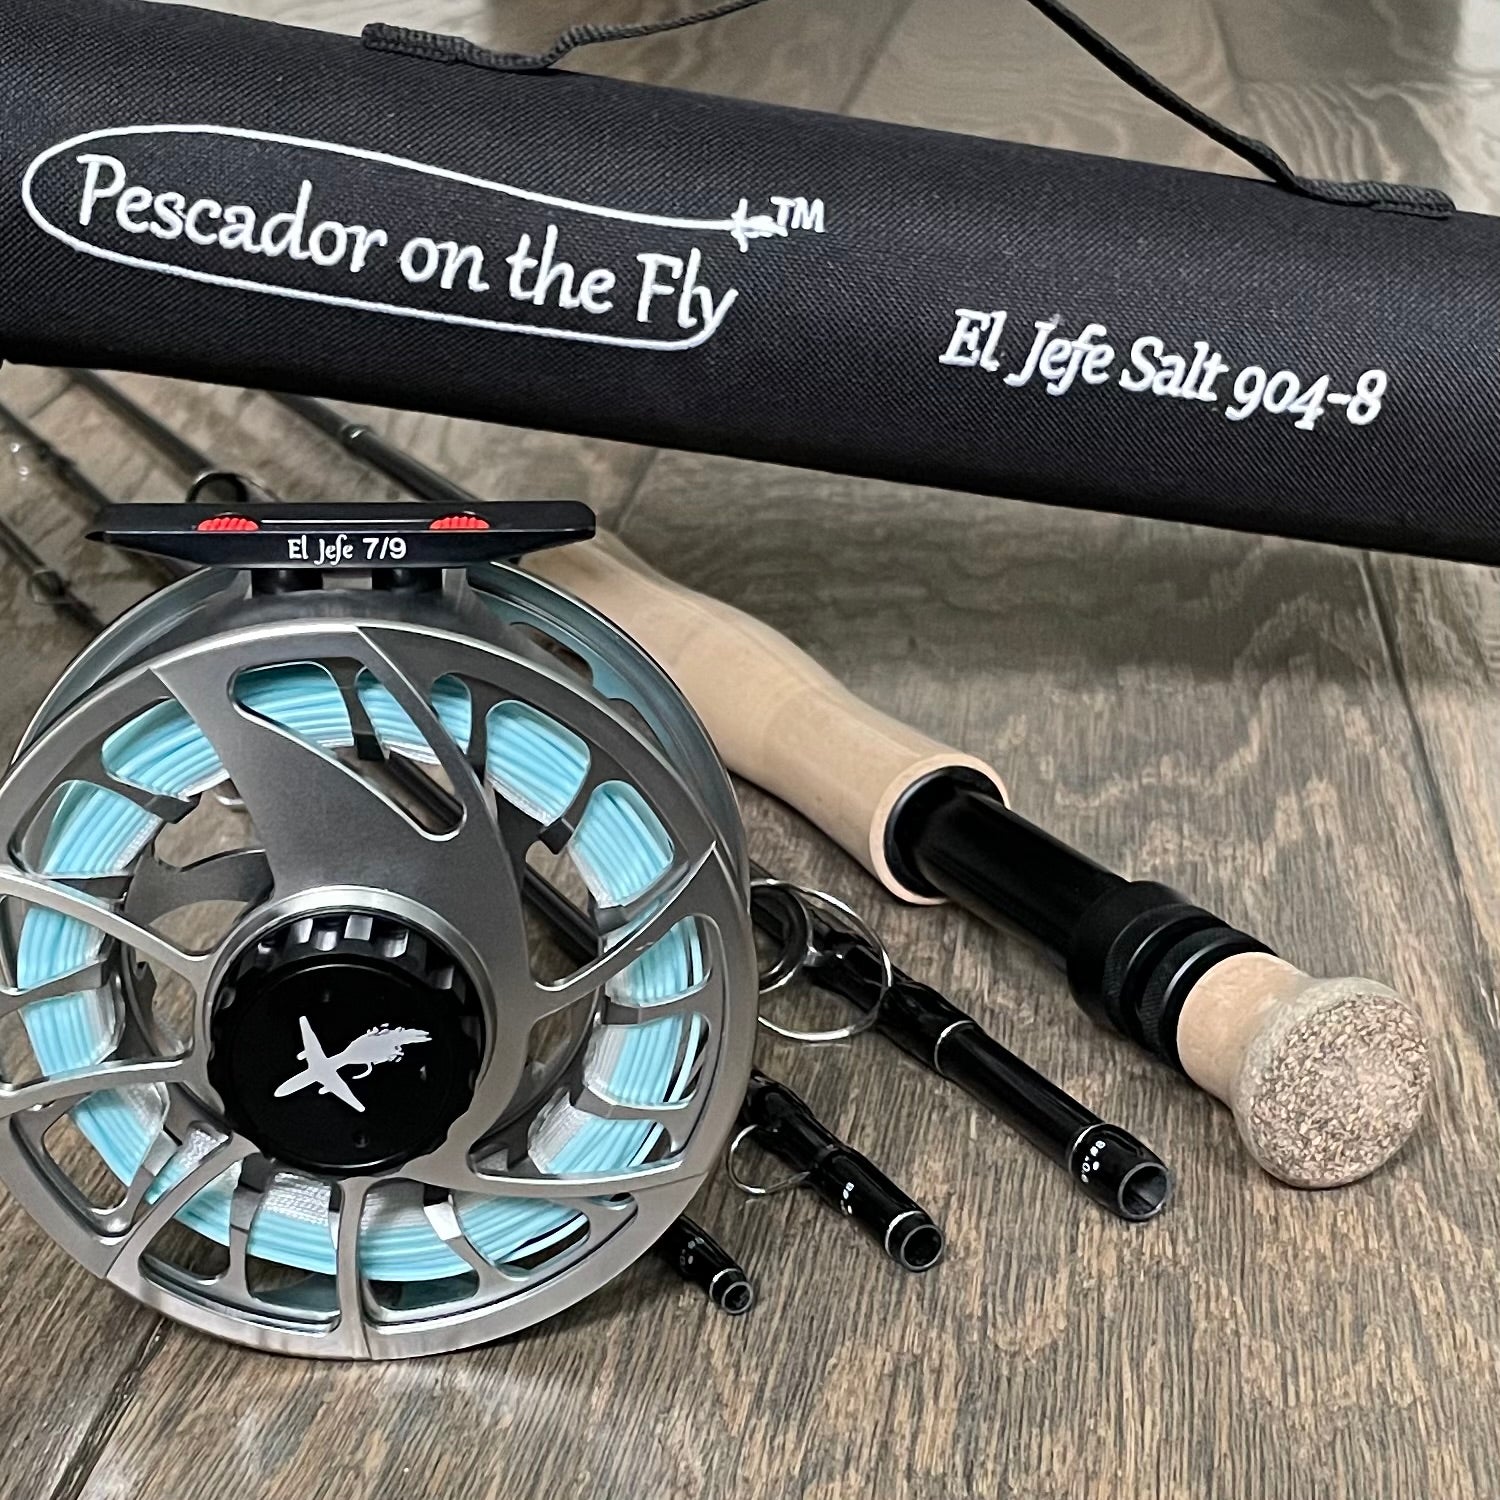 El Jefe Saltwater Fly Fishing Combo Package | 904-9 | 9' Four Section 9 Weight Fly Rod And Reel Outfit